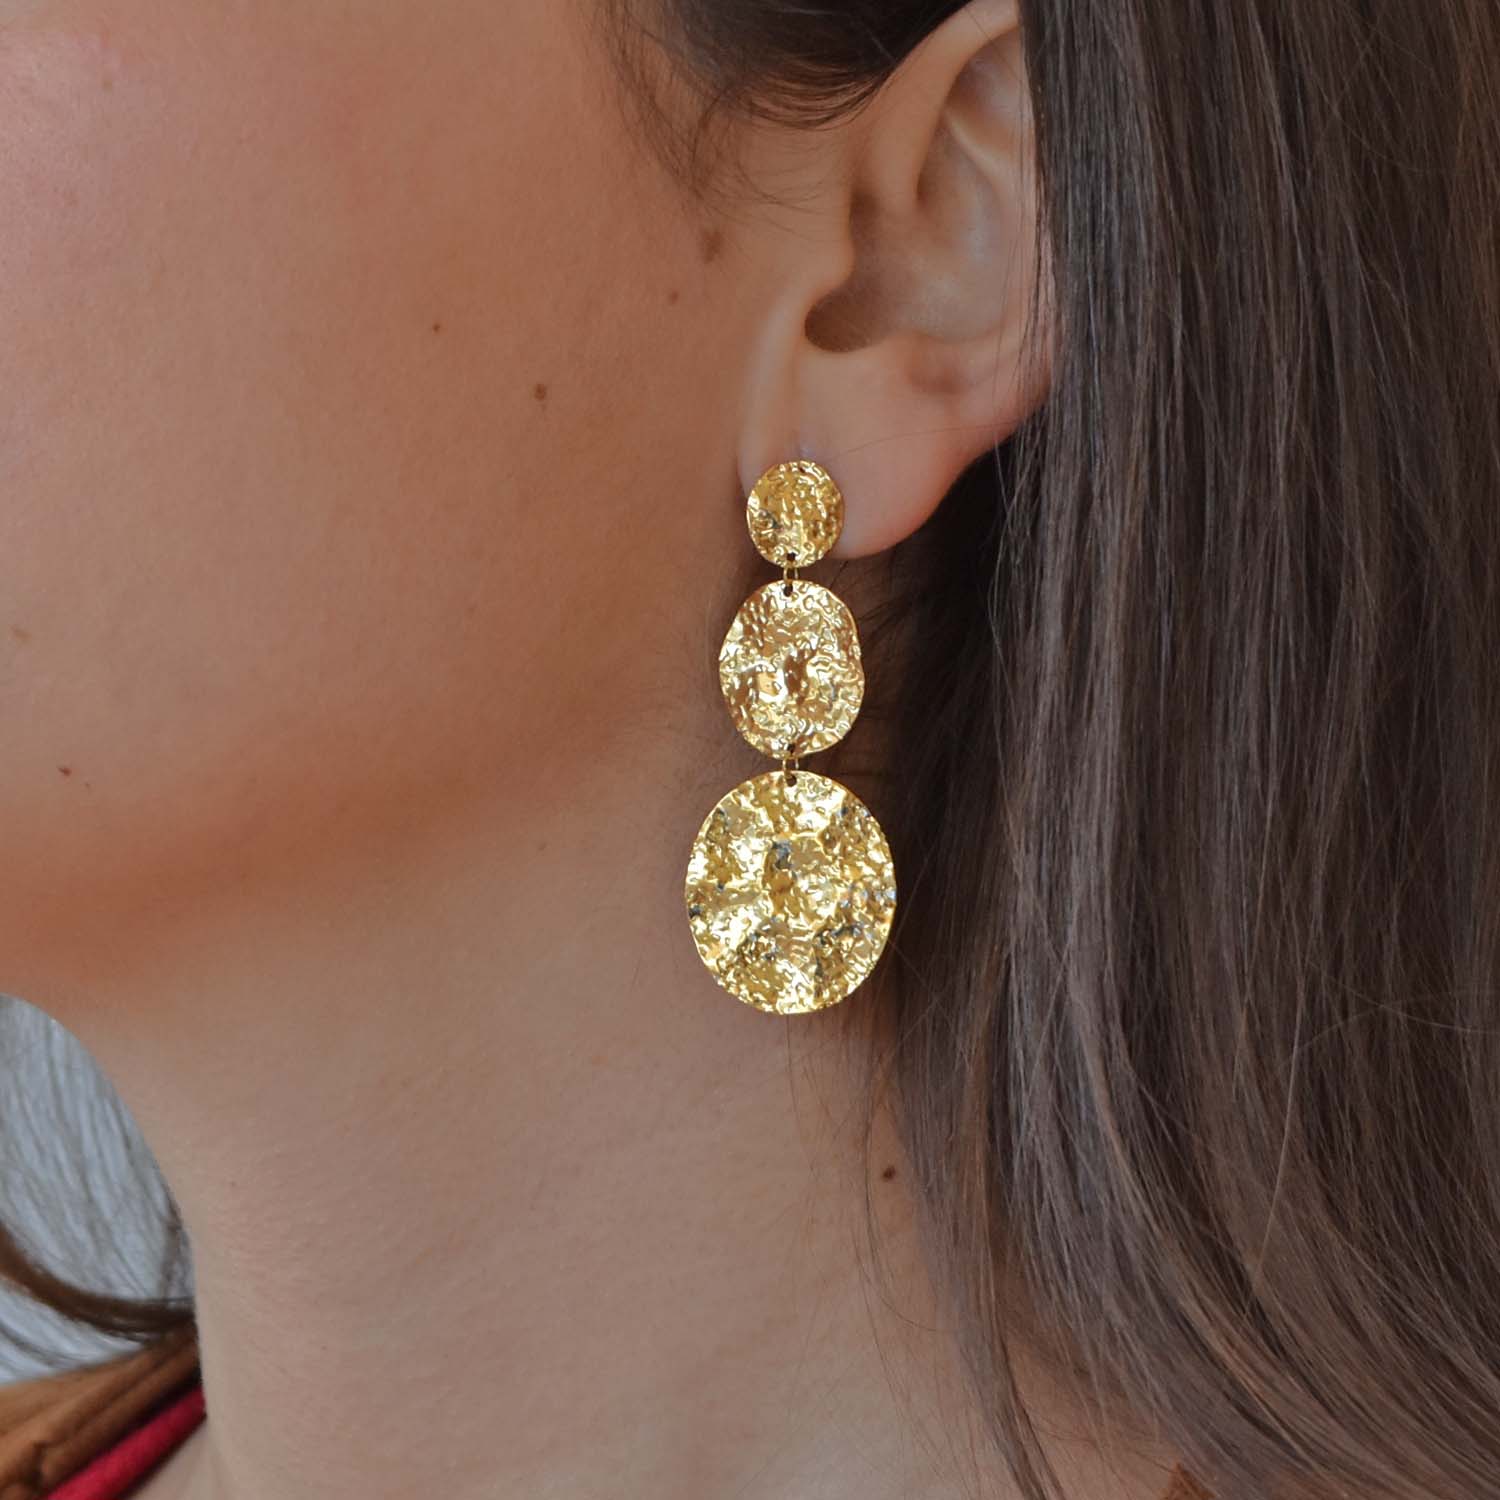 Textured round earrings